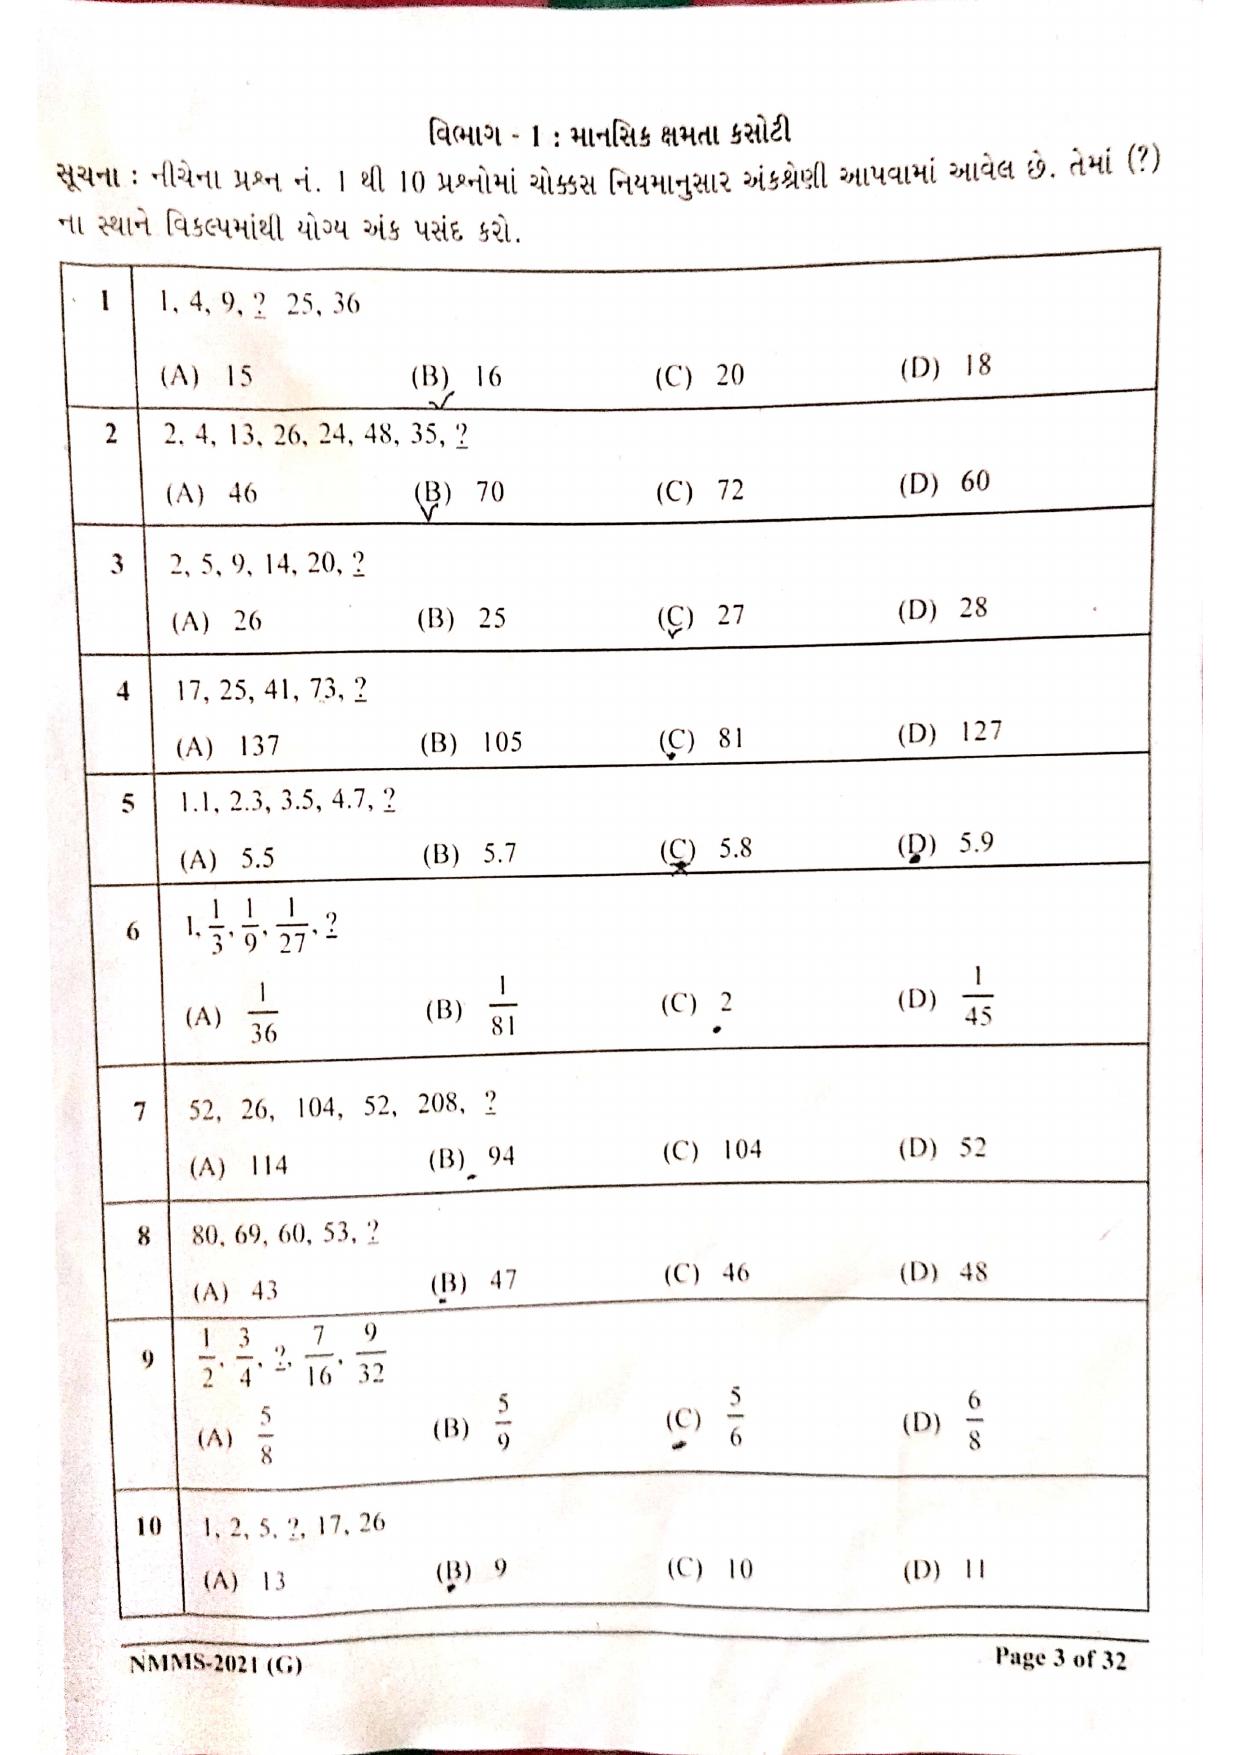 Gujarat NMMS 2021 Question Paper - Page 1